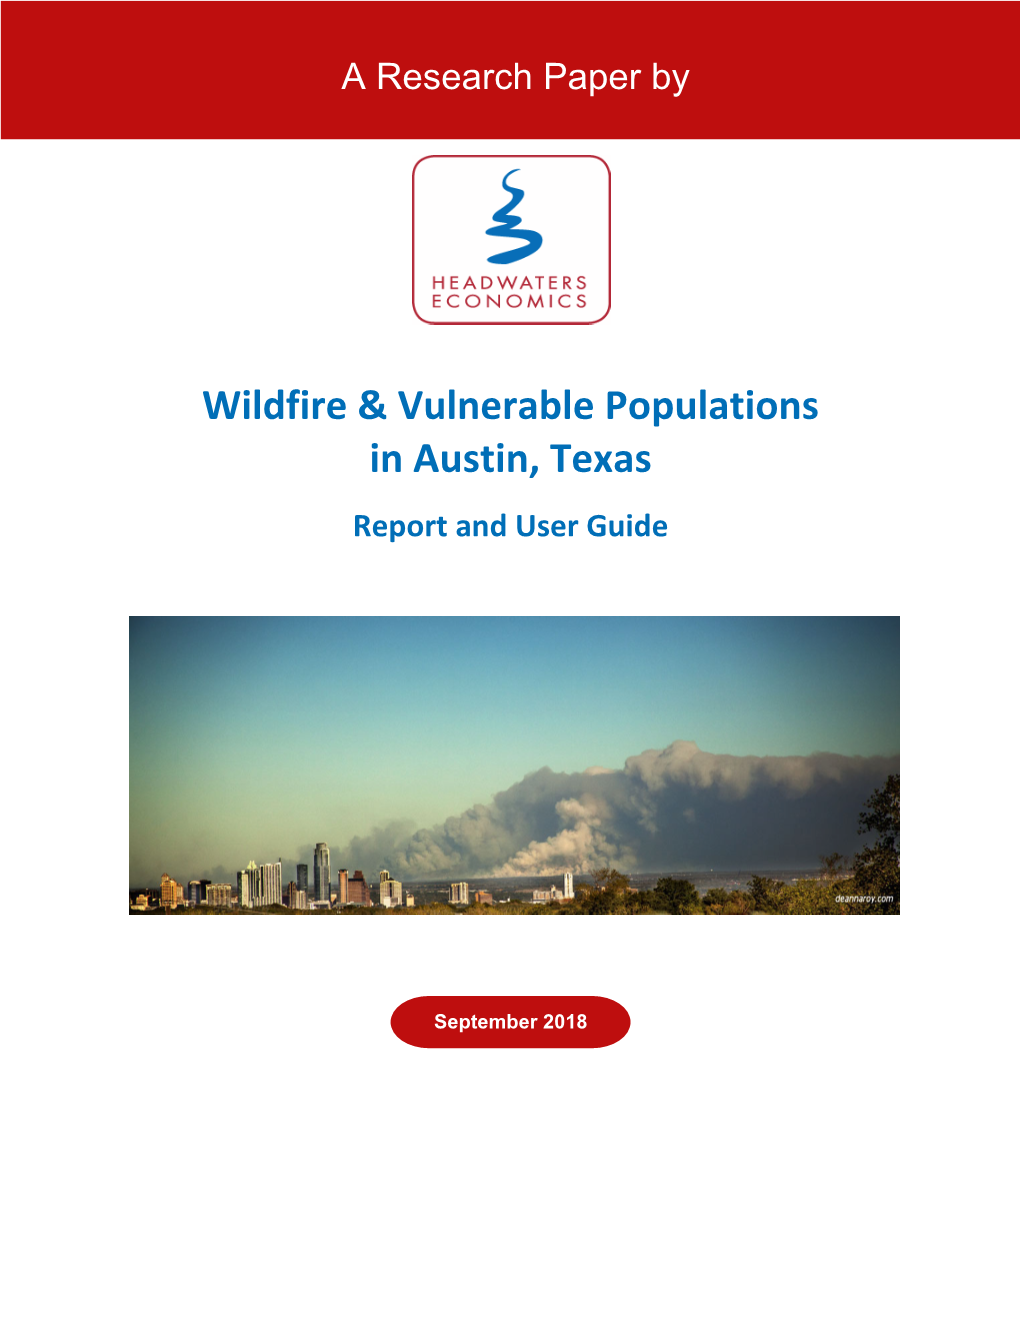 Wildfire & Vulnerable Populations in Austin, Texas